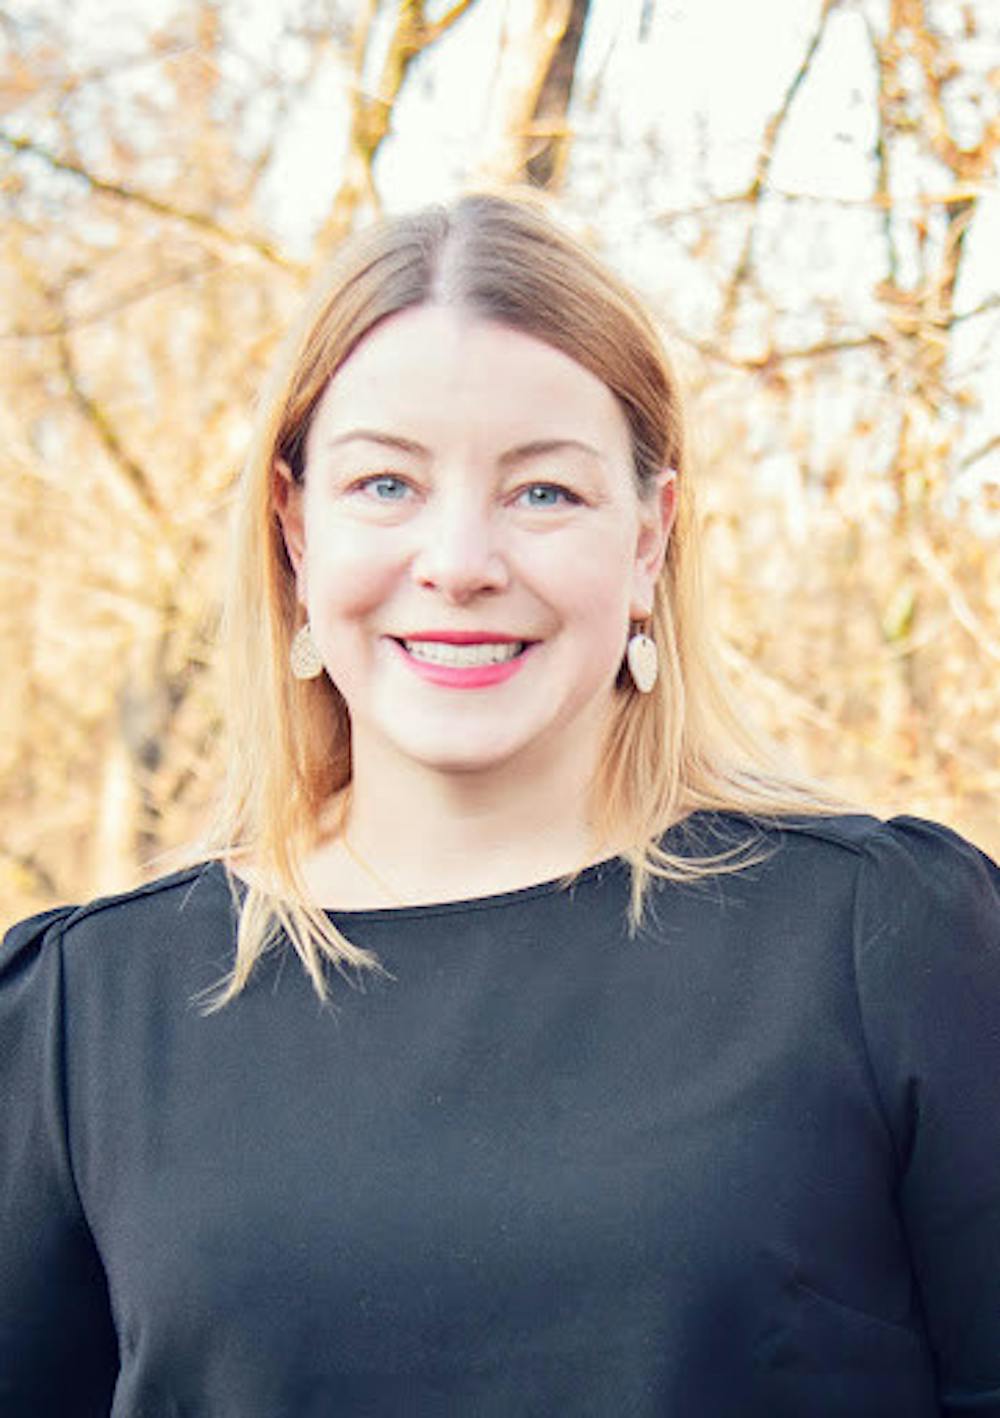 <p><em>Lauren Madden worked to expand climate change education in K-12 schools by collaborating closely with the New Jersey Department of Education and the first lady’s office (Photo courtesy of Lauren Madden).</em></p>